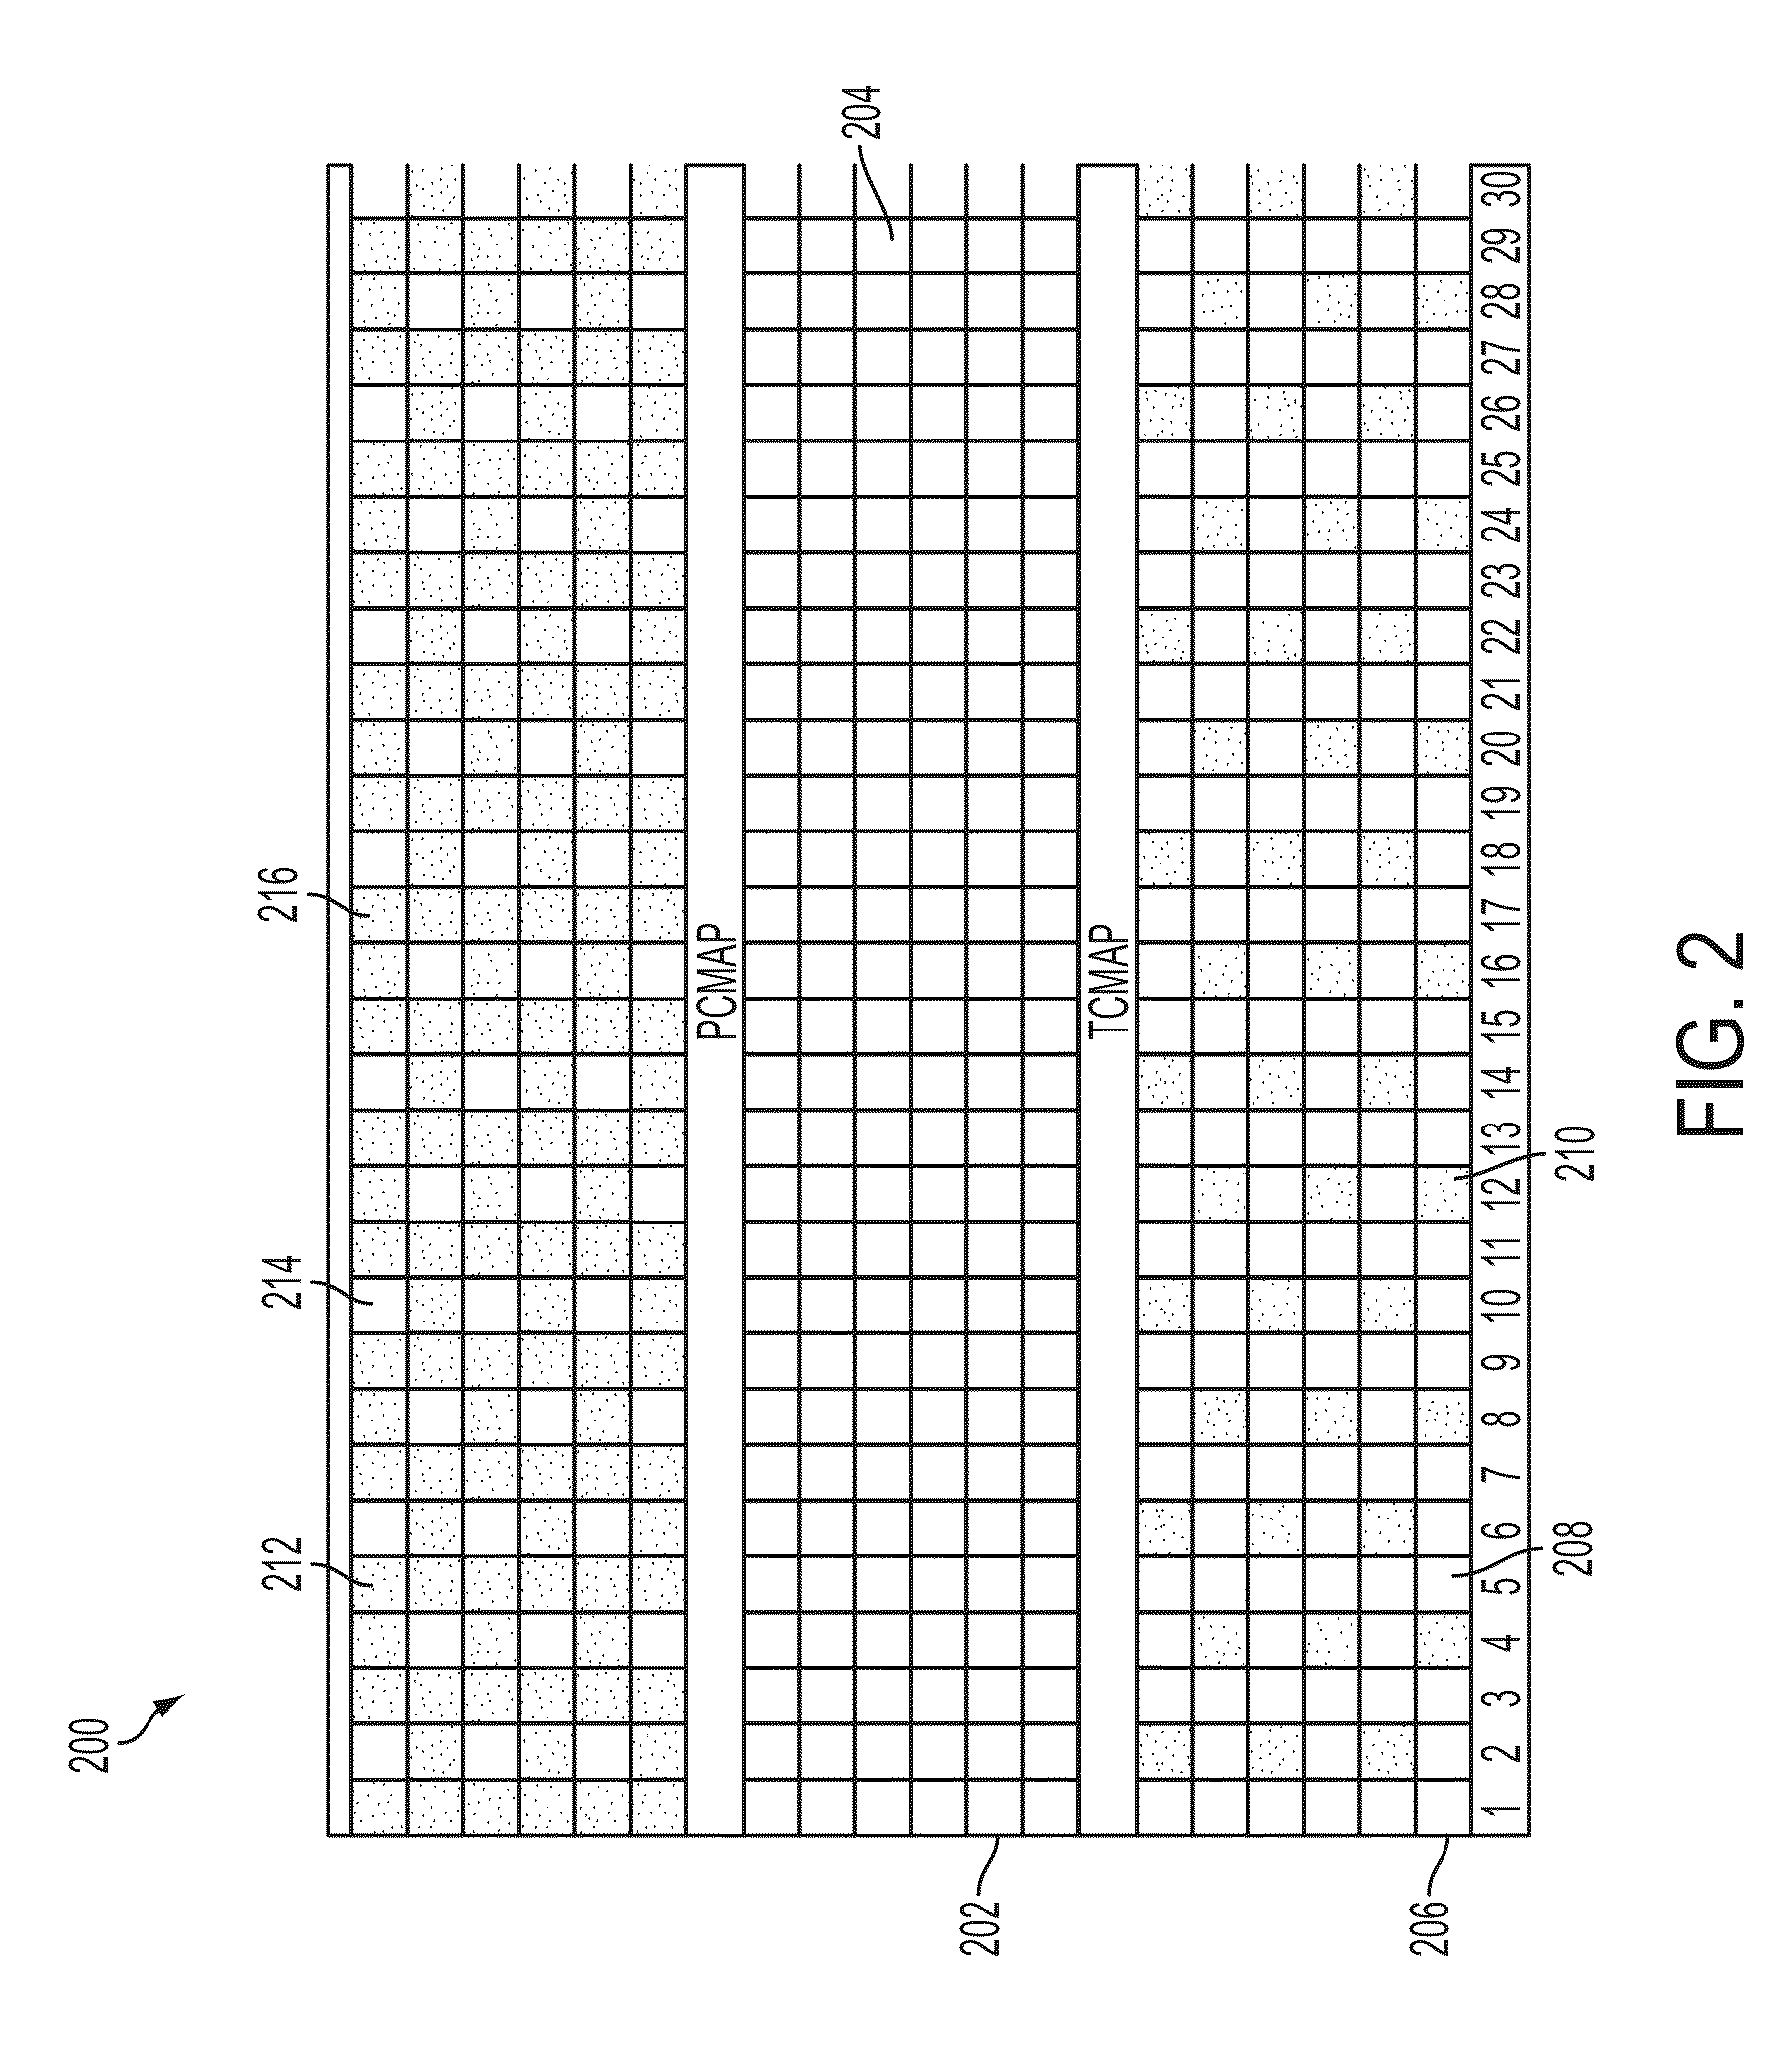 PET scanner with emission and transmission structures in a checkerboard configuration